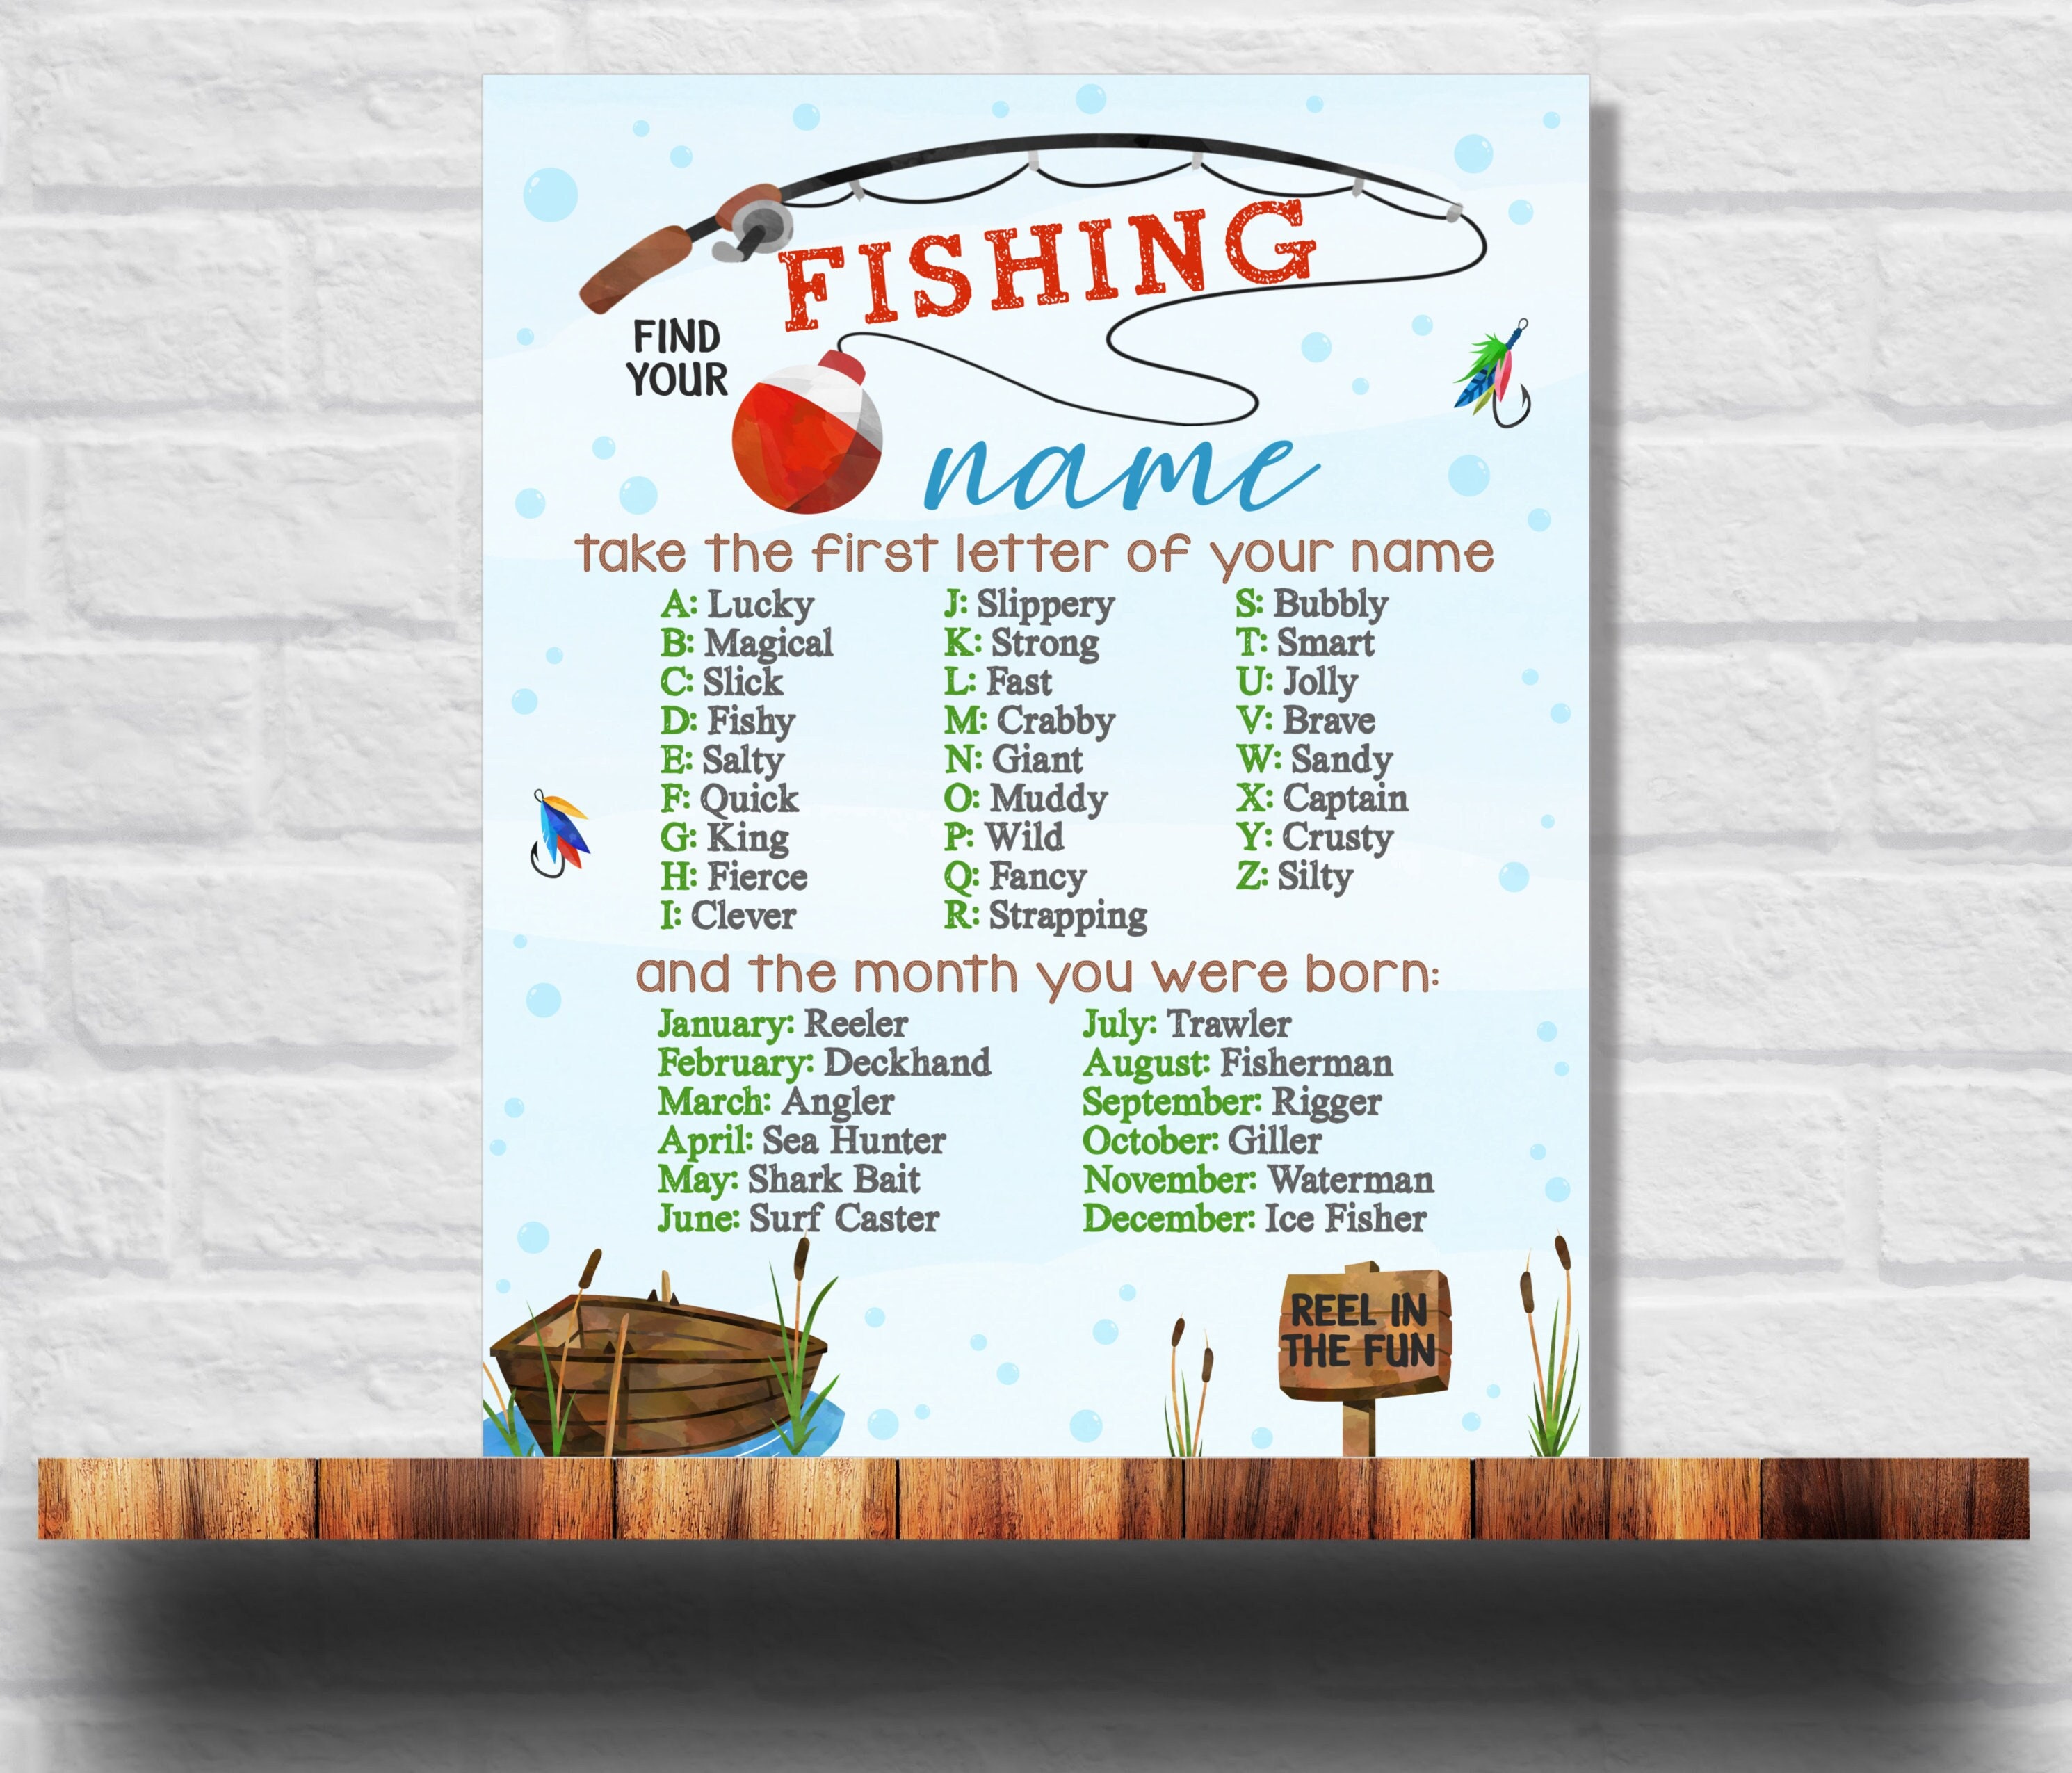 Hunting And Fishing Birthday Party - Shop on Pinterest